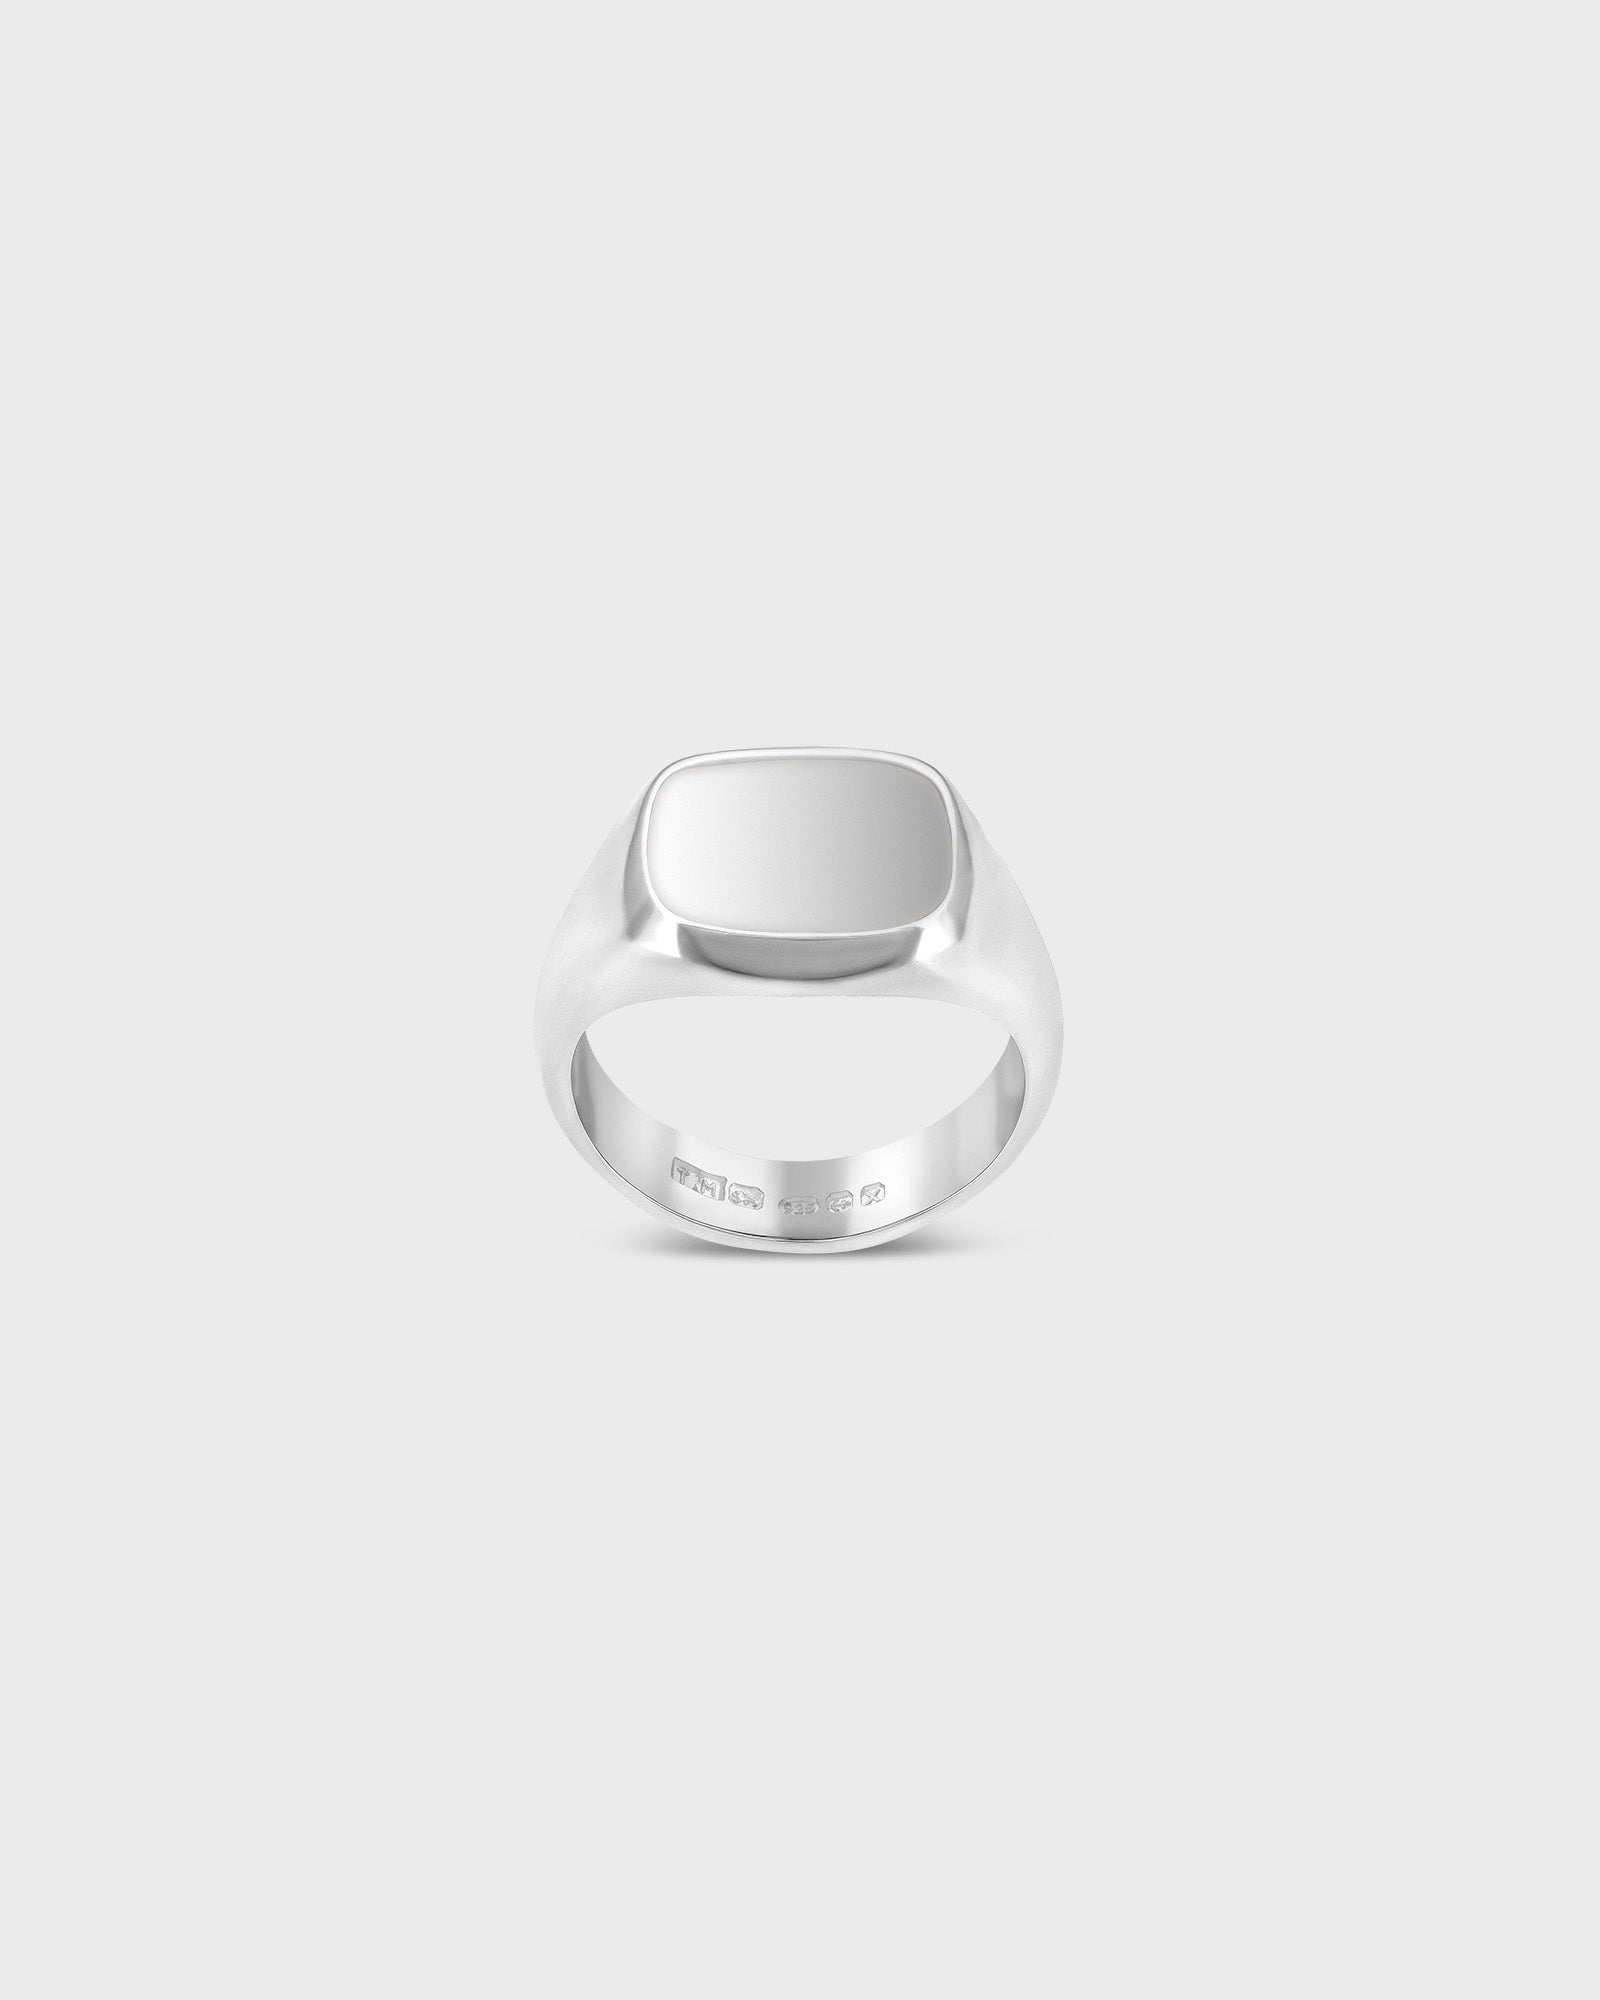 Minimal Square Signet Ring in Sterling Silver by Wilson Grant